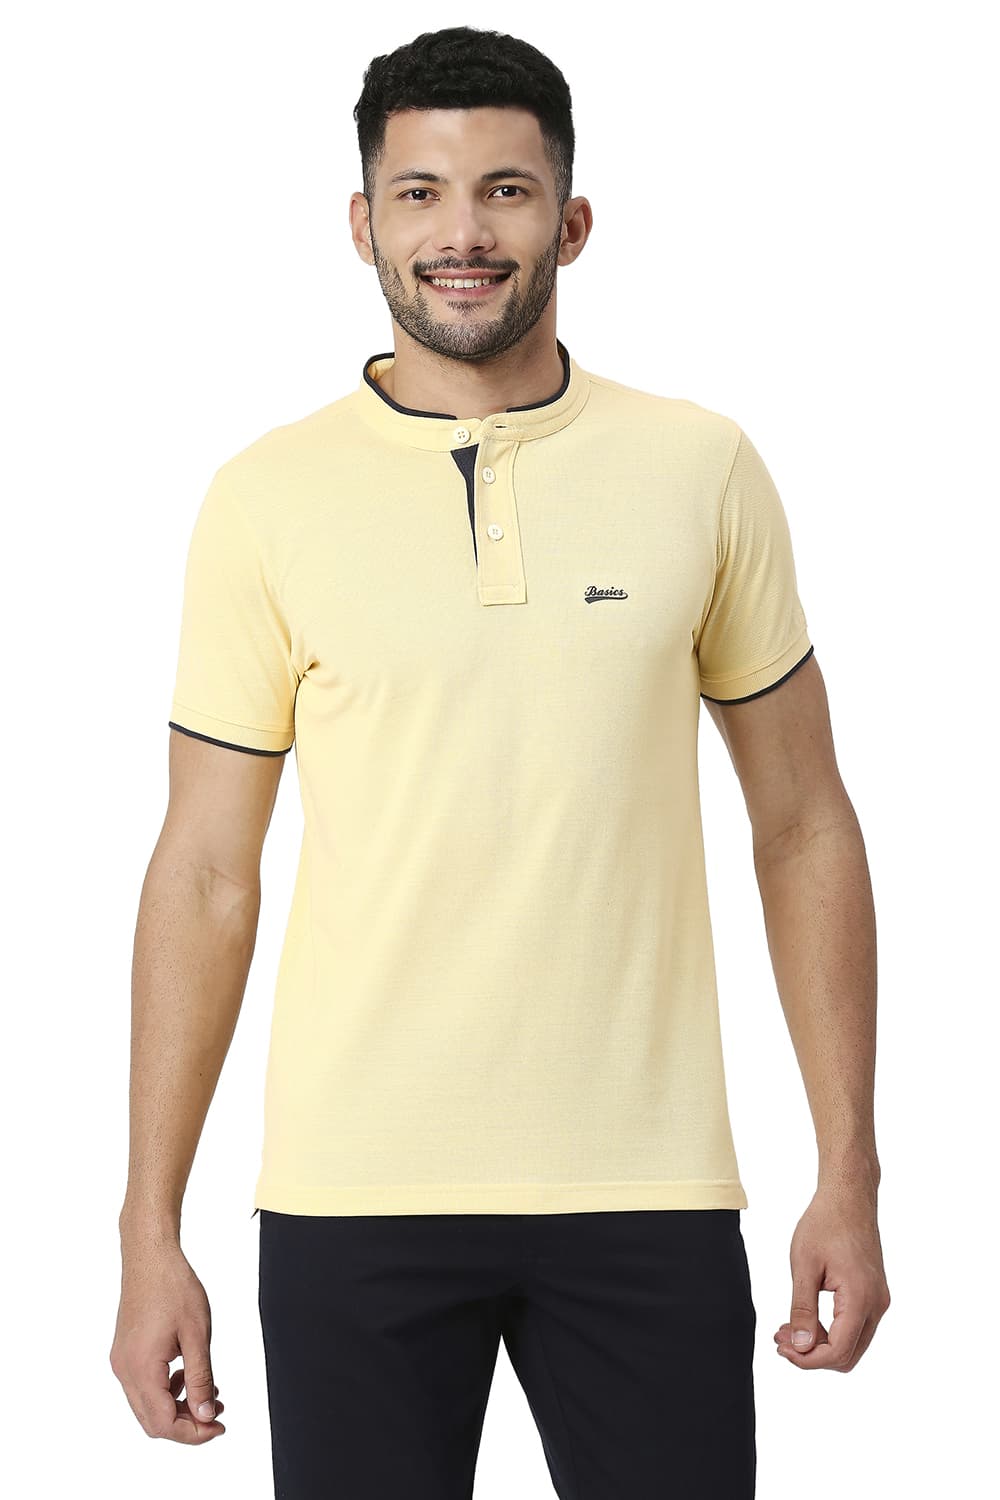 BASICS MUSCLE FIT COTTON POLYESTER POLO T-SHIRT